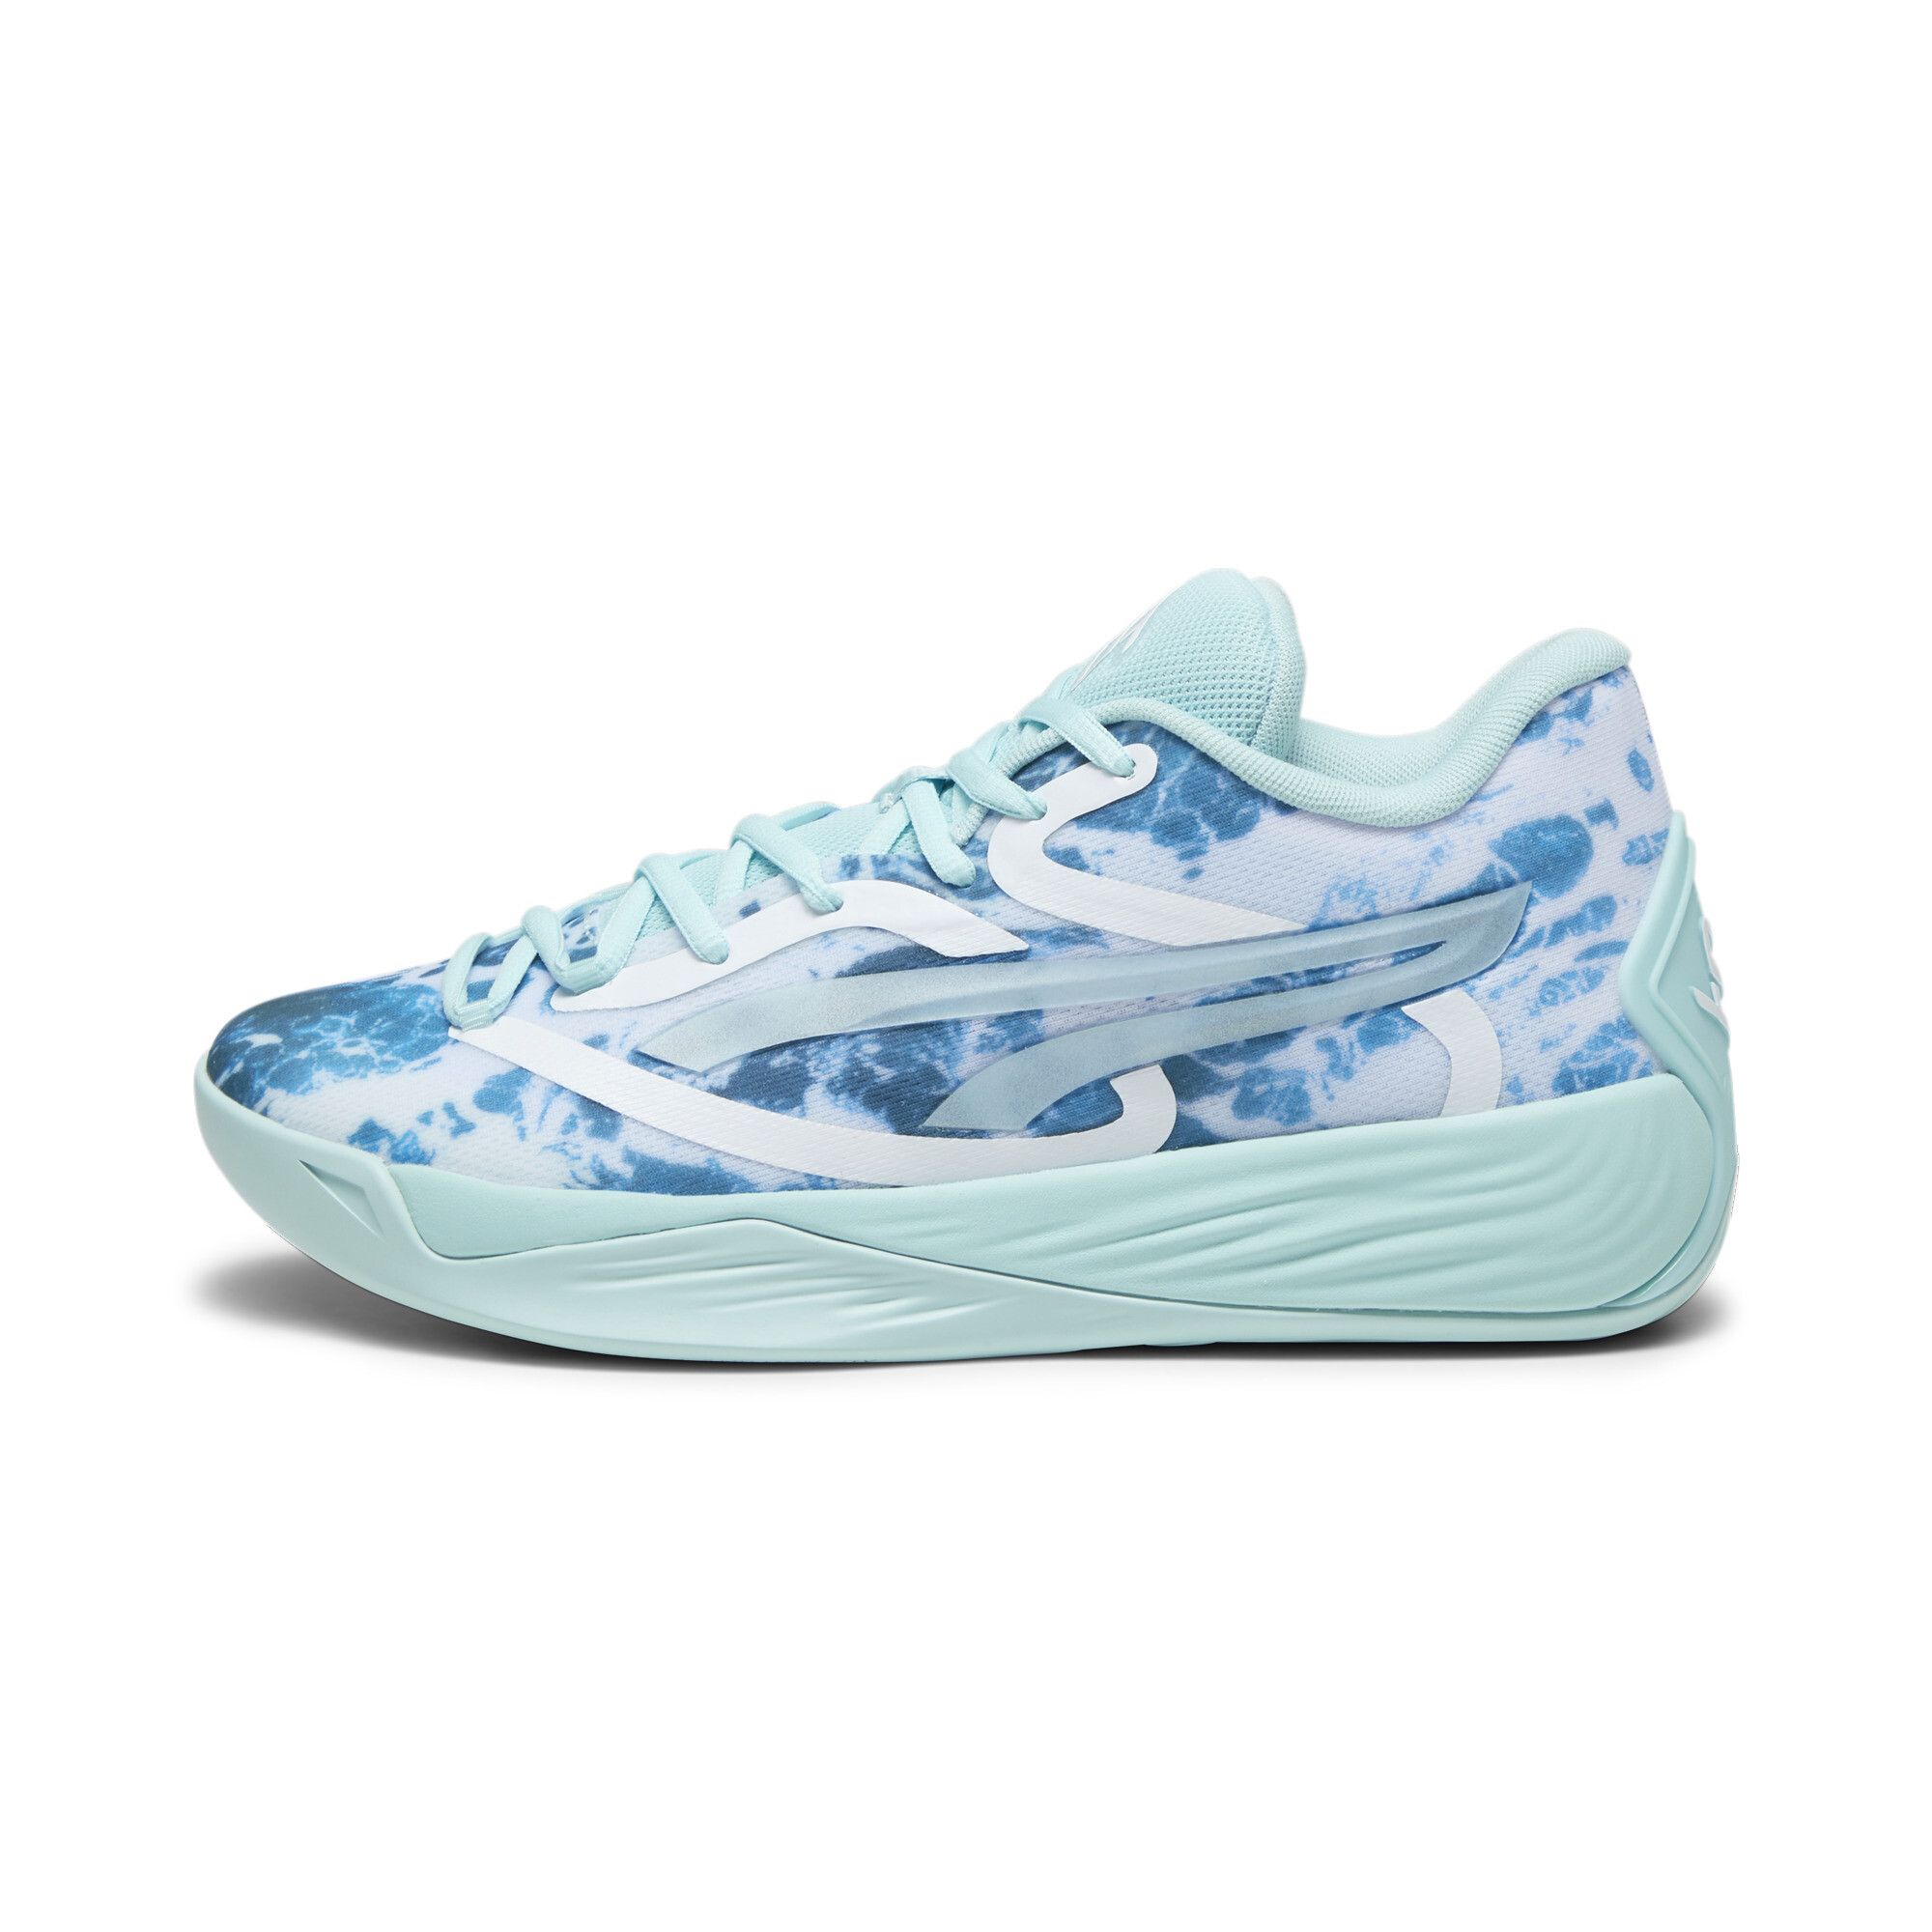 Women's Puma Stewie 2 Water's Basketball Shoes, Blue, Size 48, Shoes